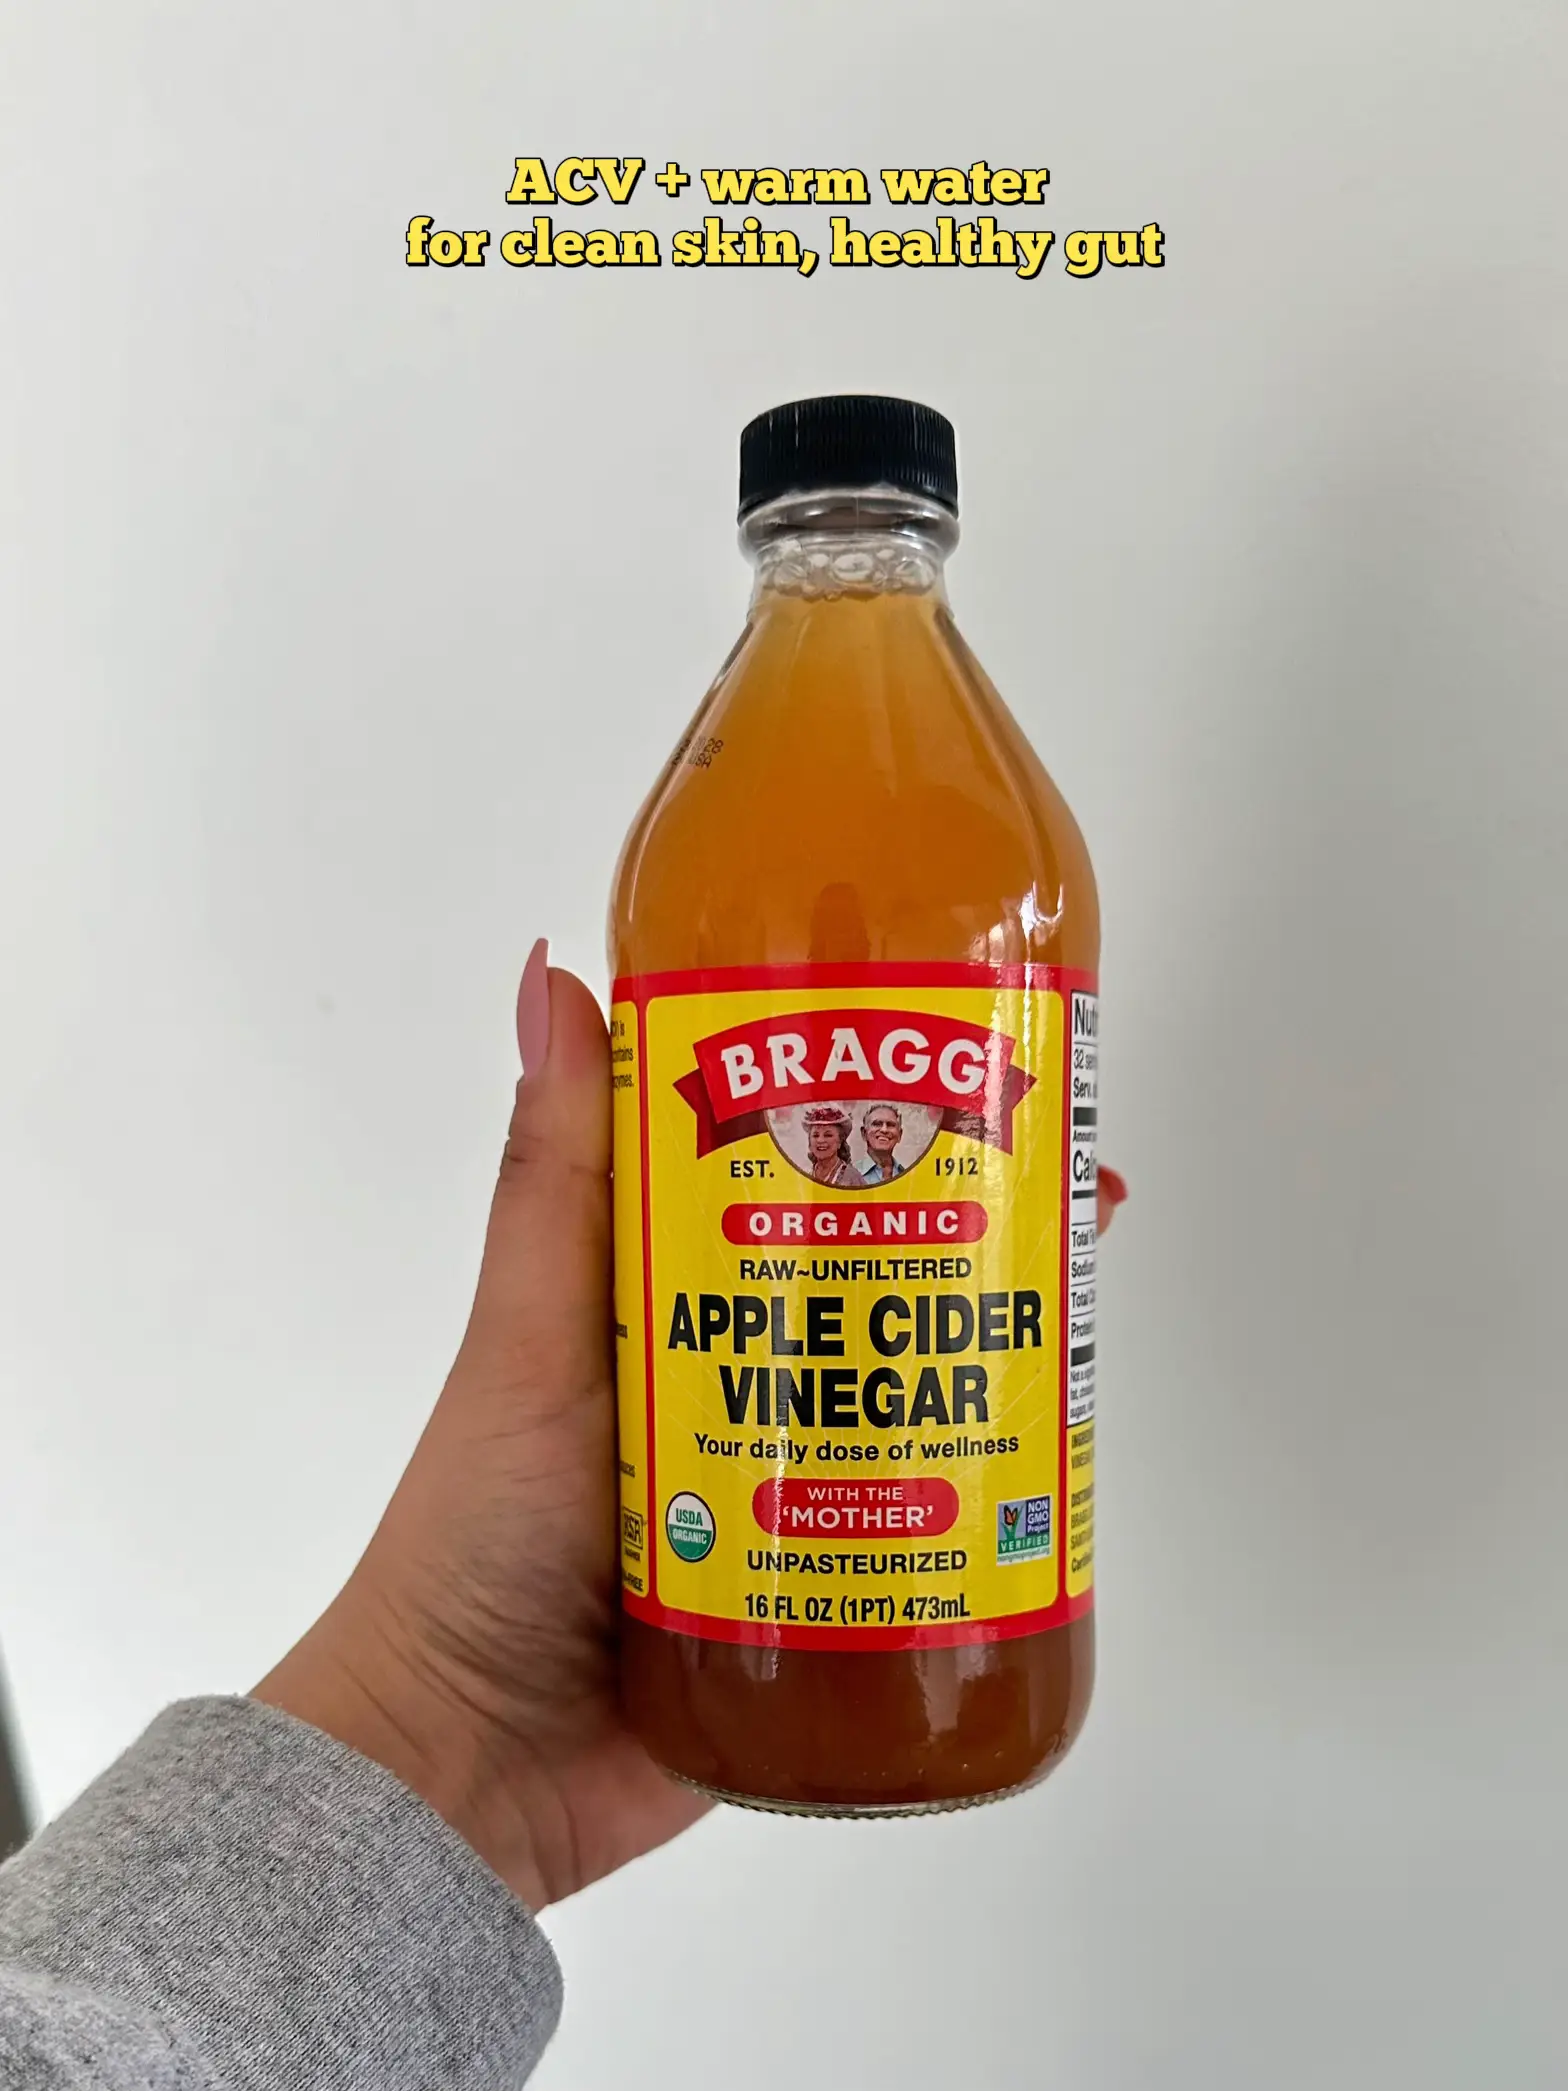 Beat The Bloat and Drink Apple Cider Vinegar